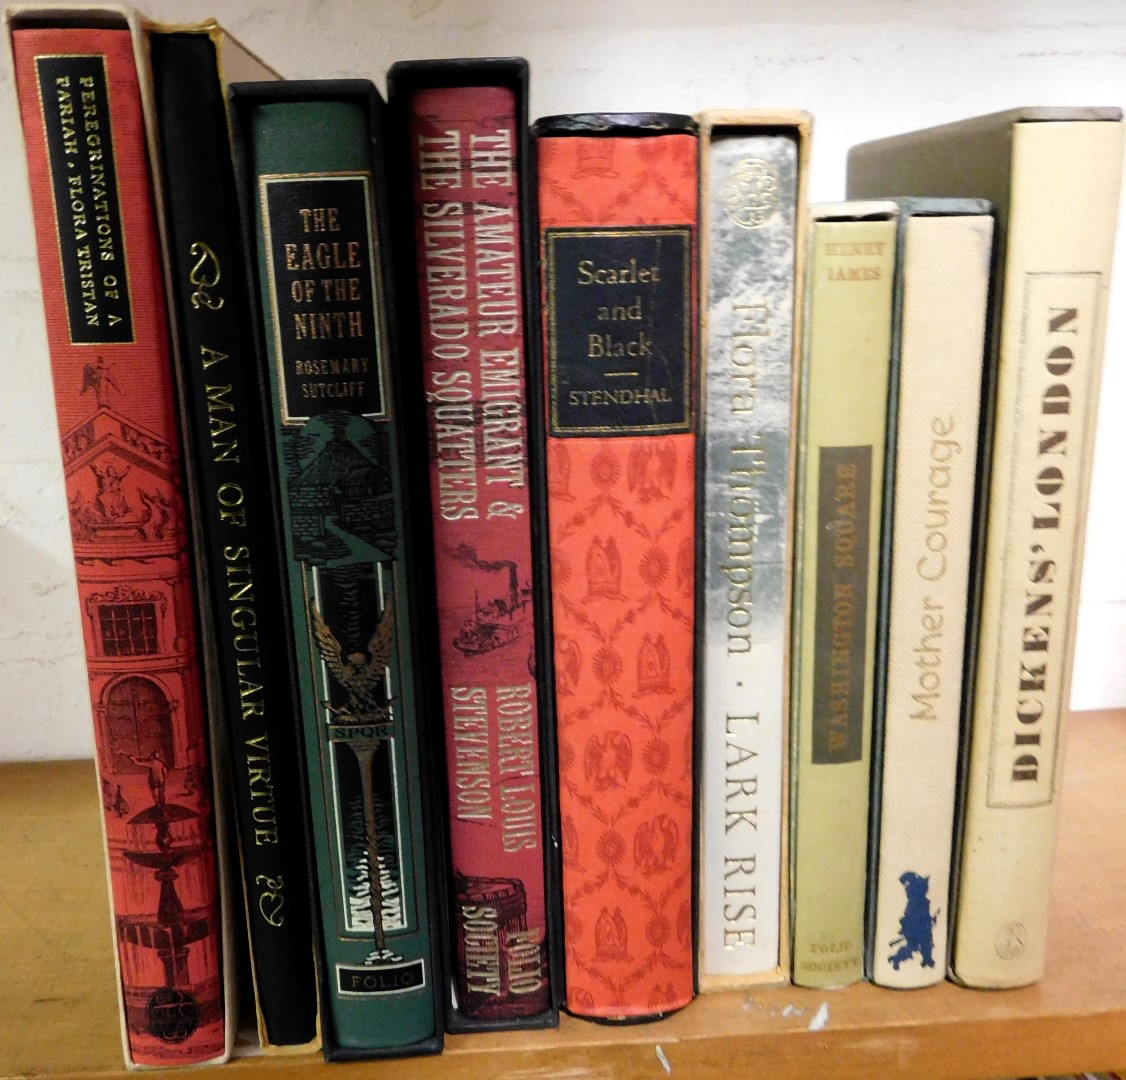 Books. Folio Society, comprising Dicken's London, Mother Courage, James (Henry) Washington Square, T